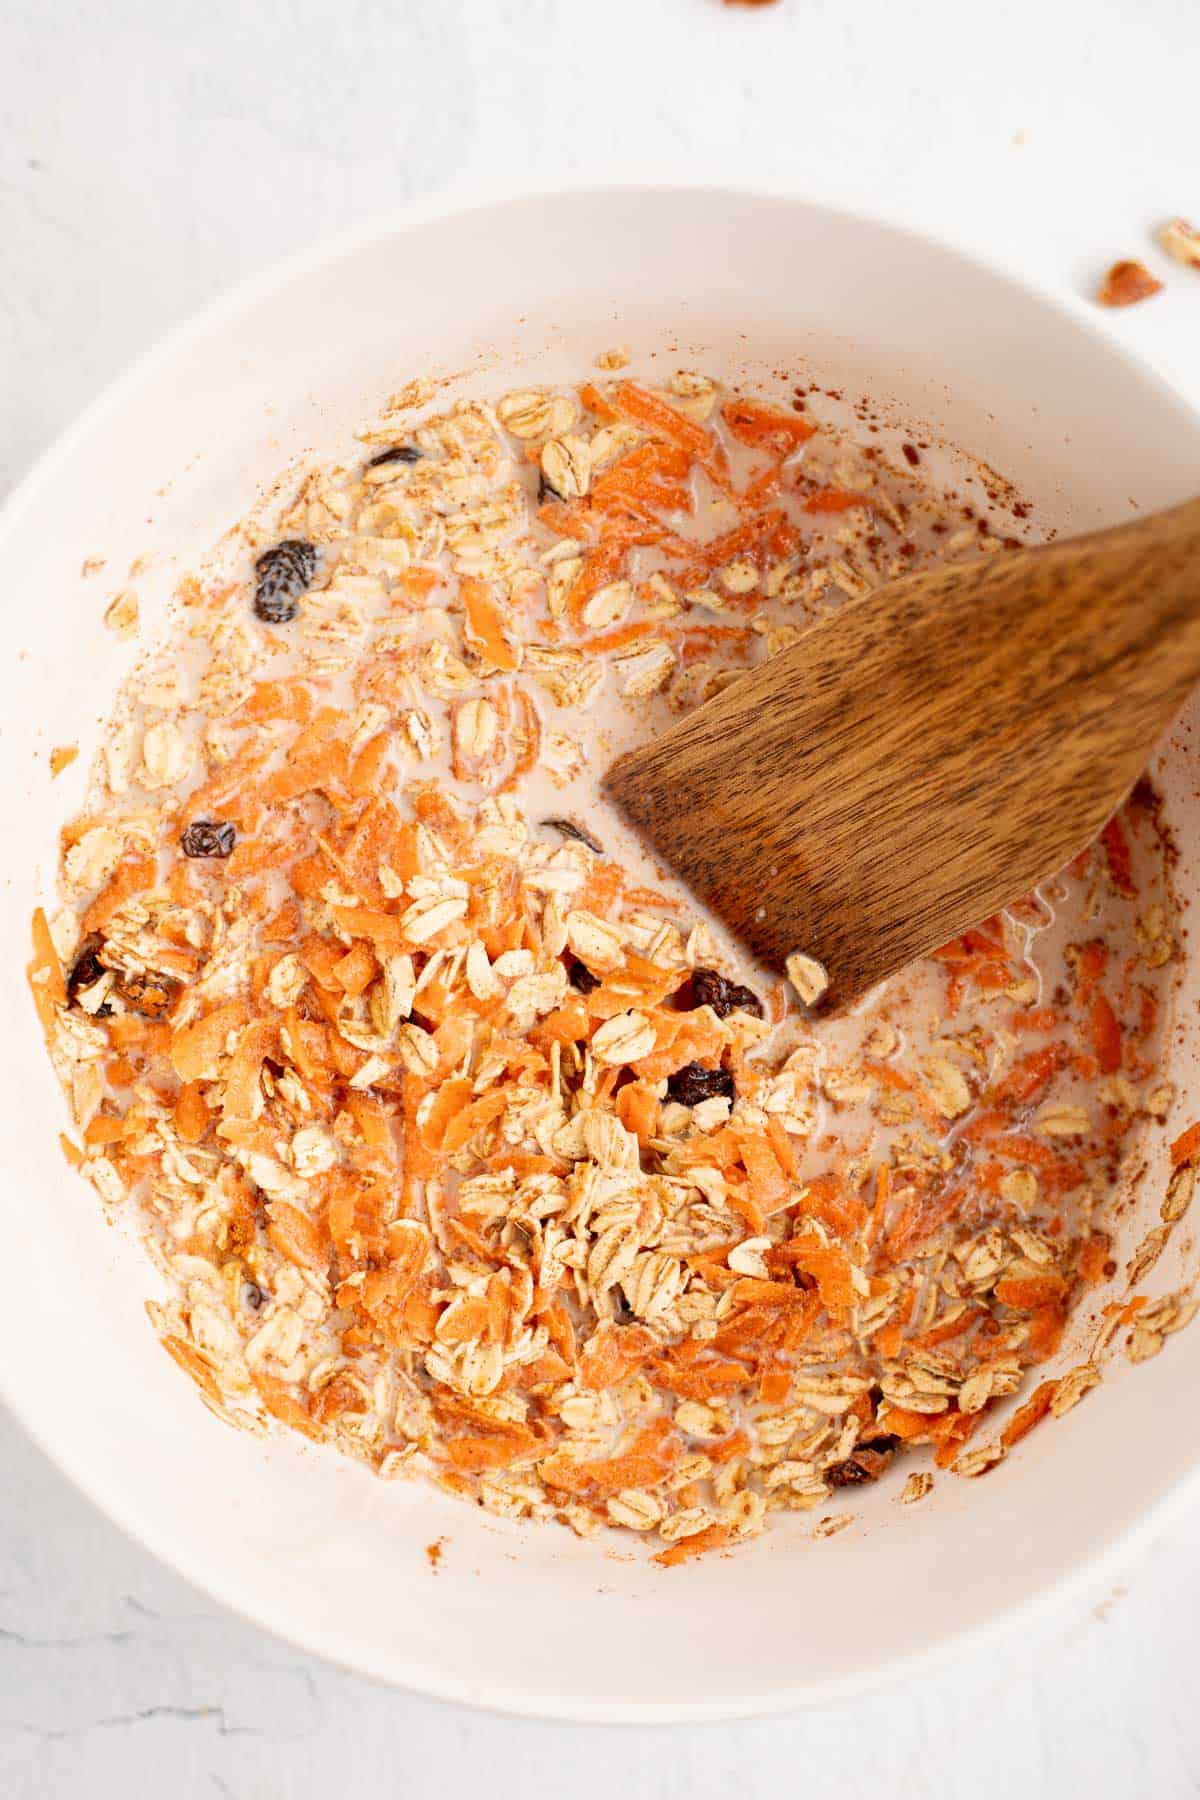 oats, raisins, milk, and shredded carrots in a white bowl with a wooden spoon.